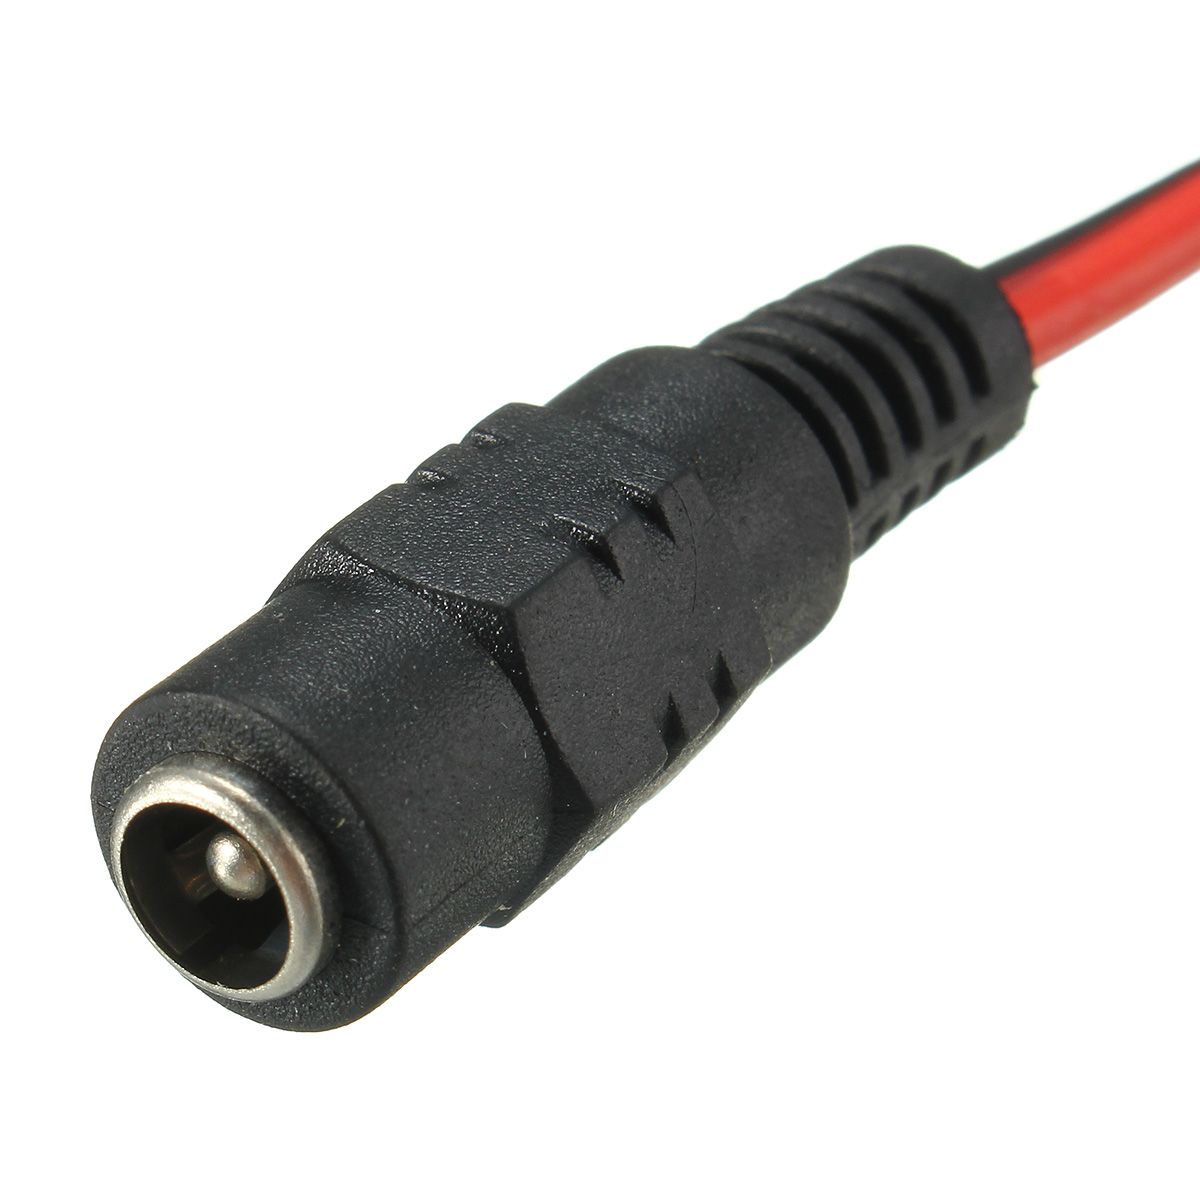 20PCS-LUSTREON-DC12V-Female-Power-Supply-Jack-Connector-Cable-Plug-Cord-Wire-55mm-x-21mm-1369170